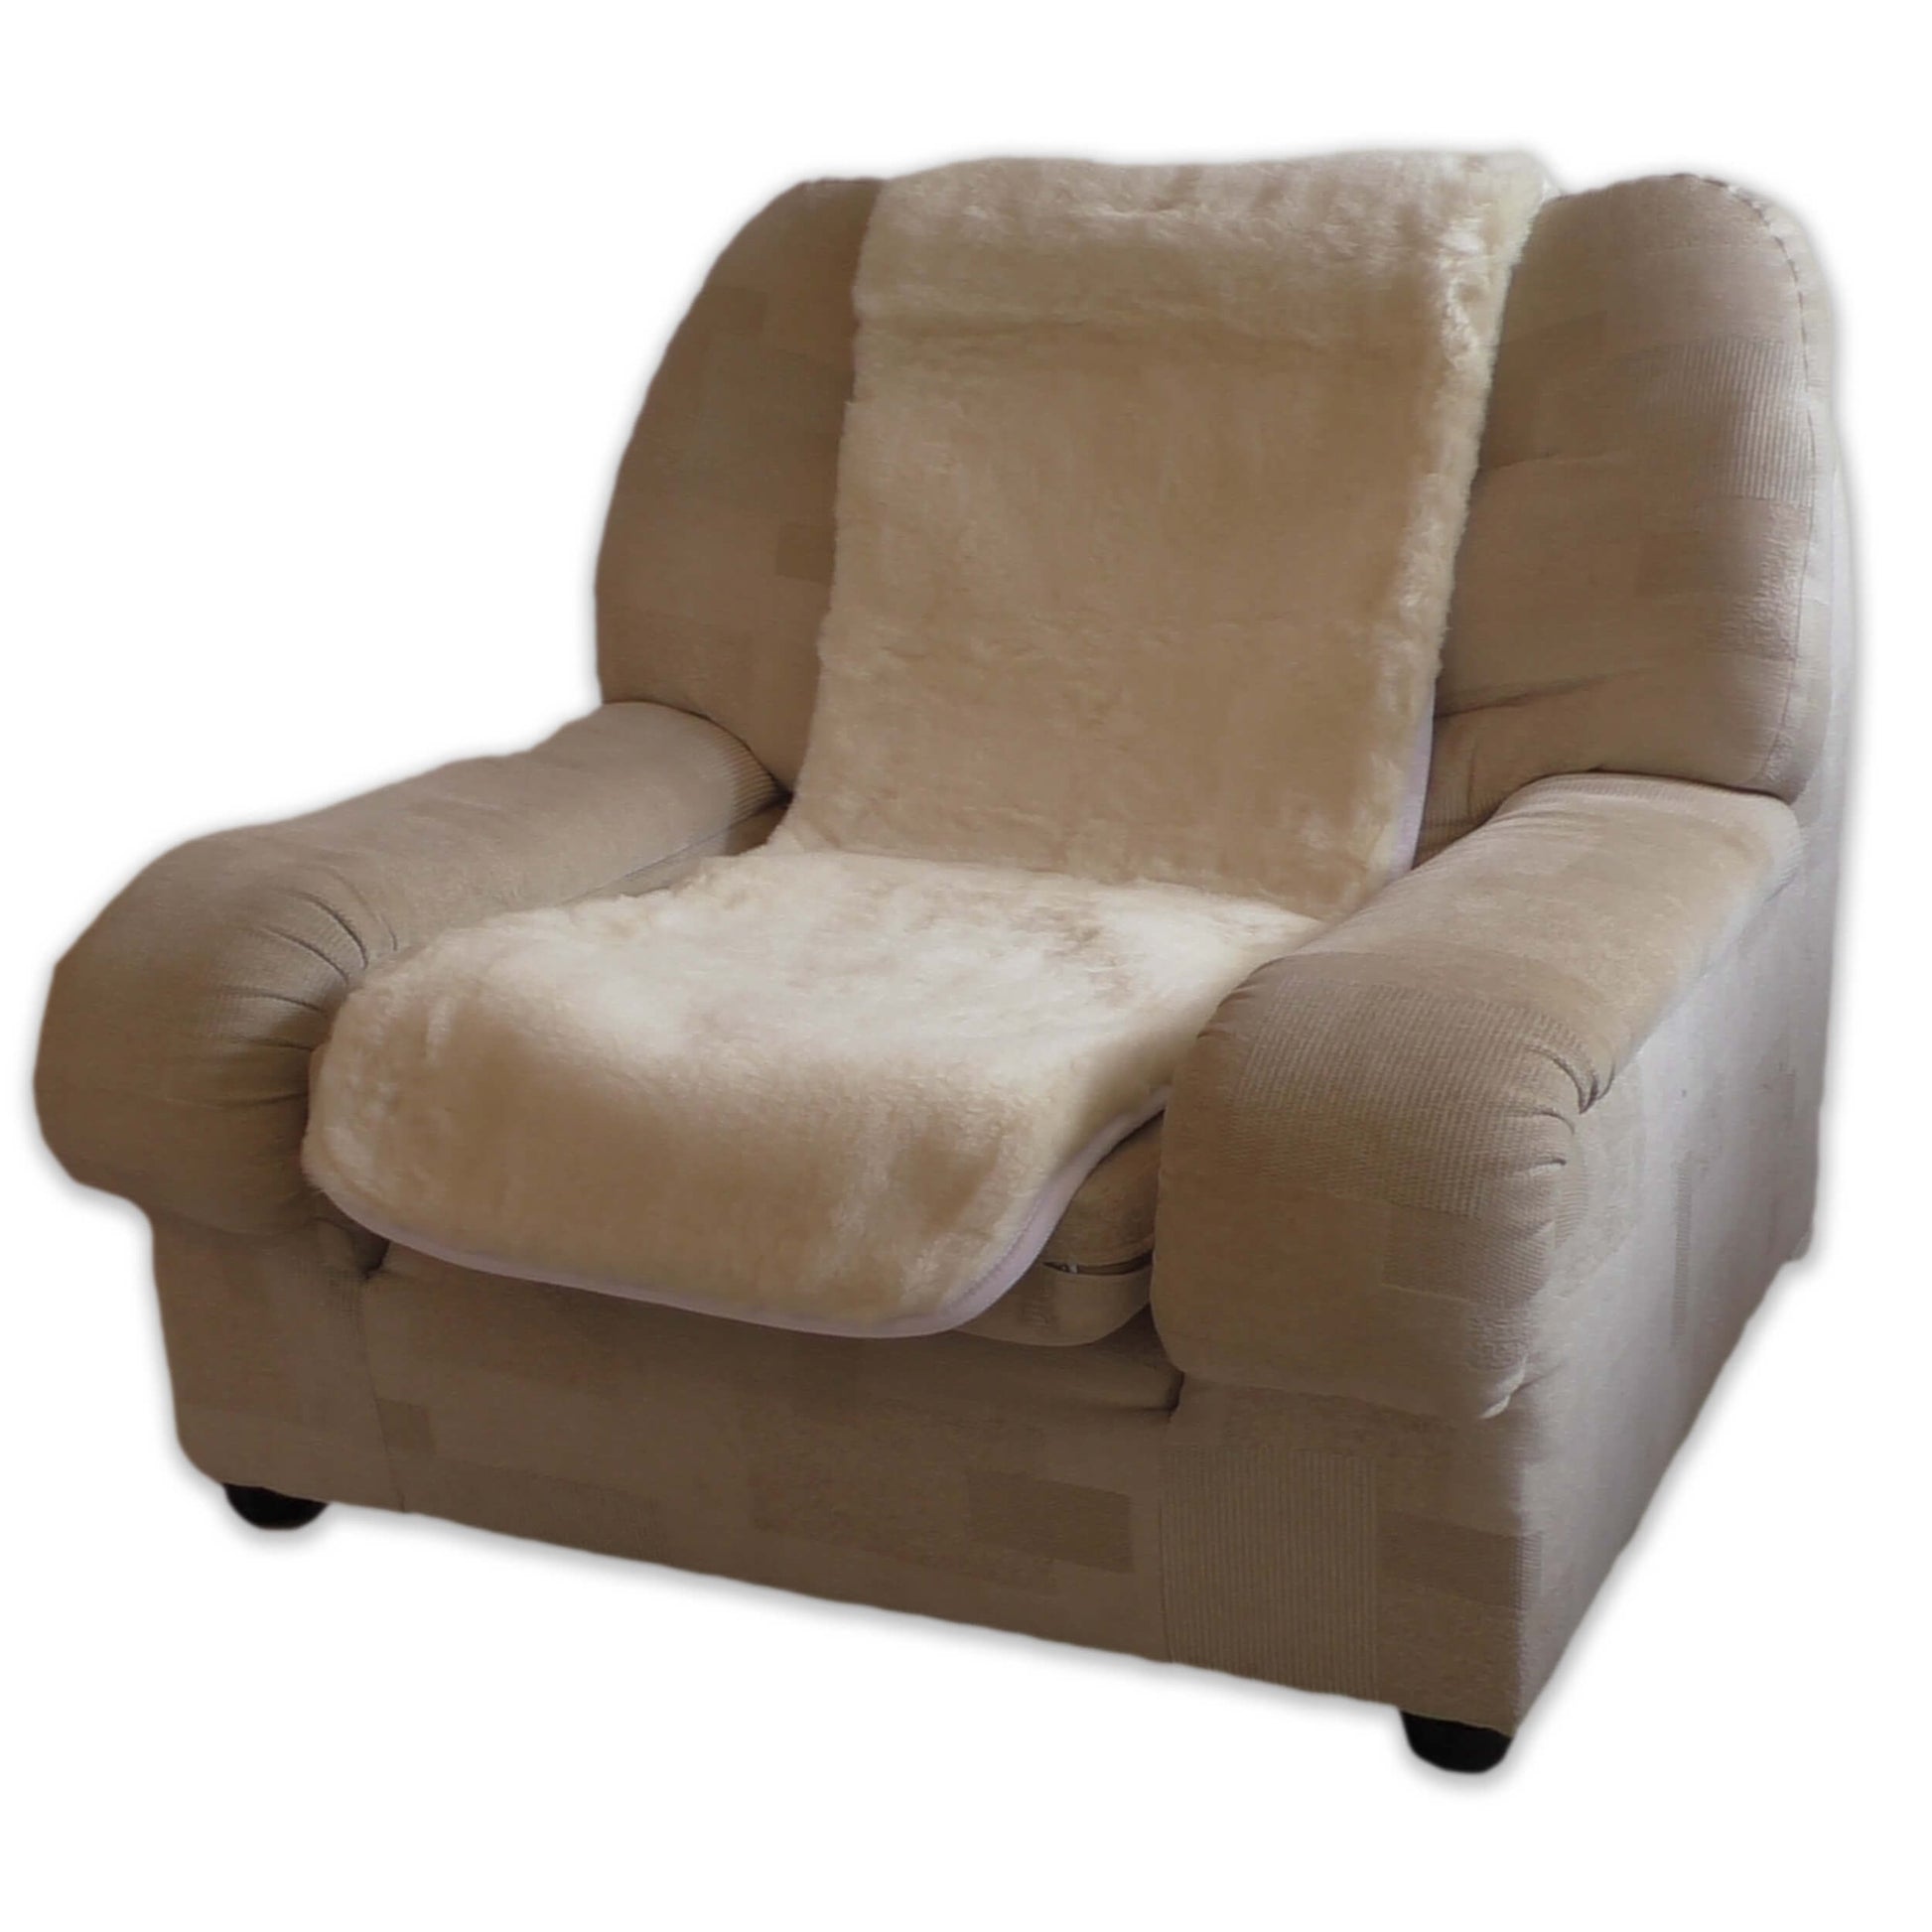 Shear Comfort Regal Day Chair Overlay - White